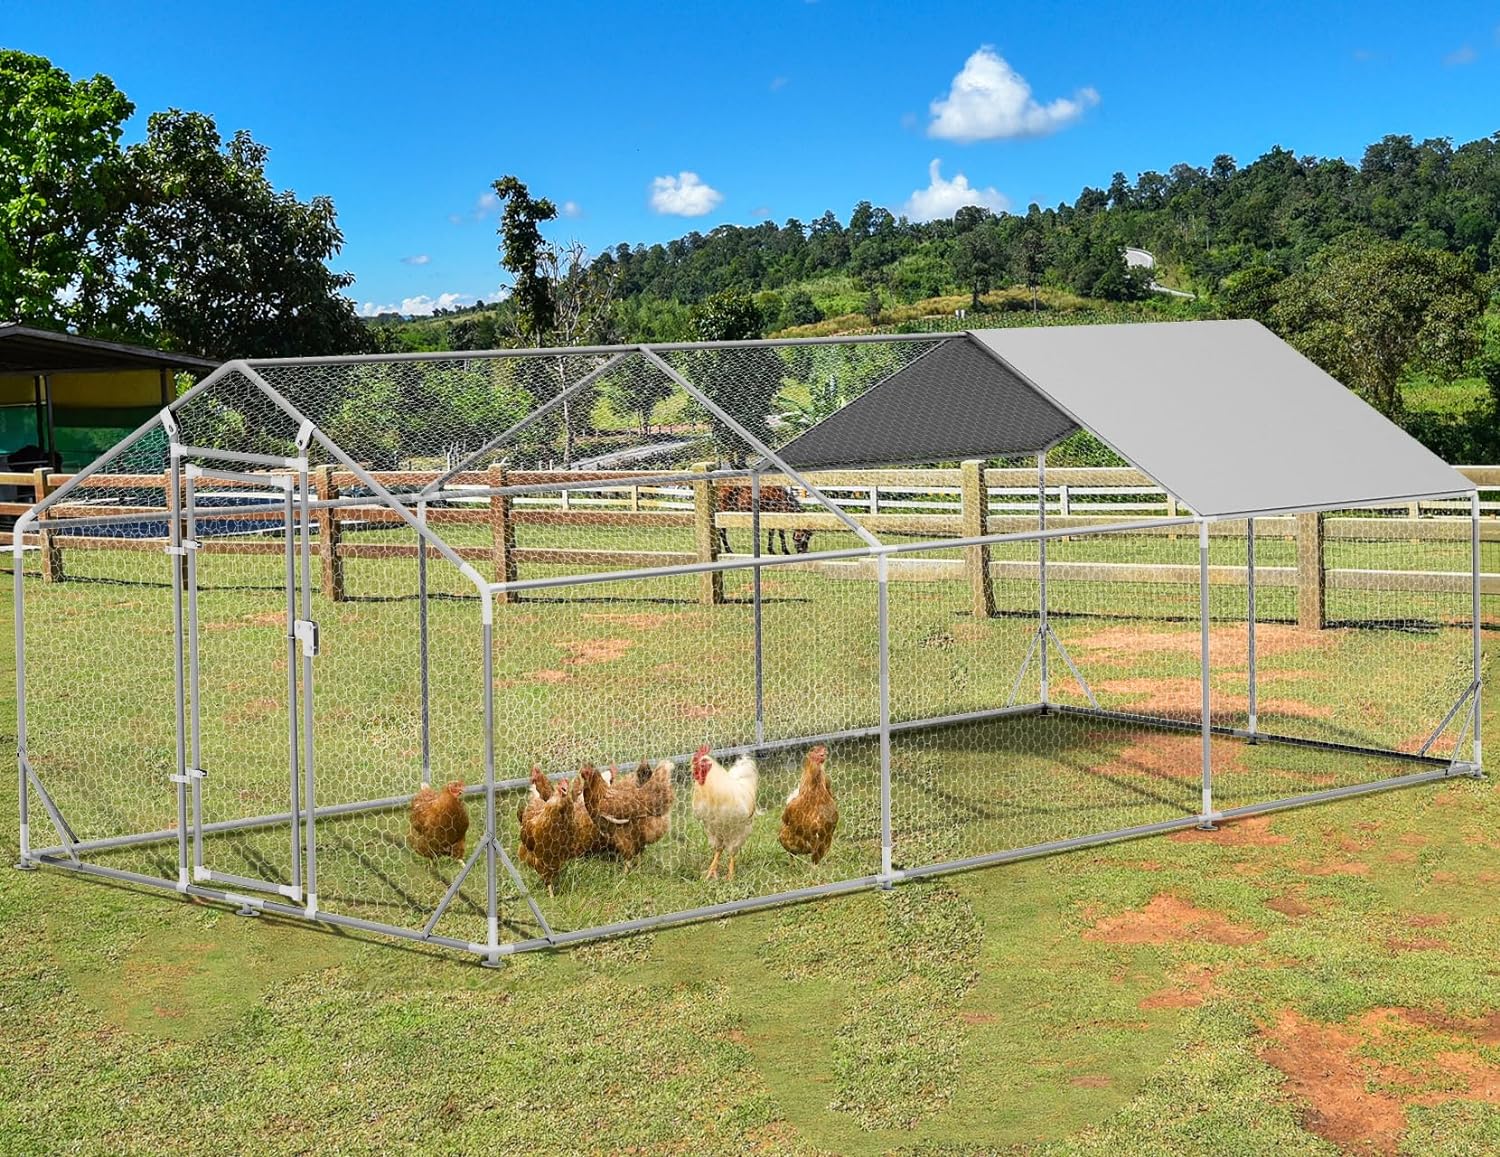 PETSFIT Large Metal Chicken Coops with Anti-Rust Durable Steel & 420D Anti-Ultraviolet Waterproof Cover, Large Walk-in Poultry Cage Chicken Run for Outdoor Farm Use 118"x236"x76.8"-动物/宠物用品